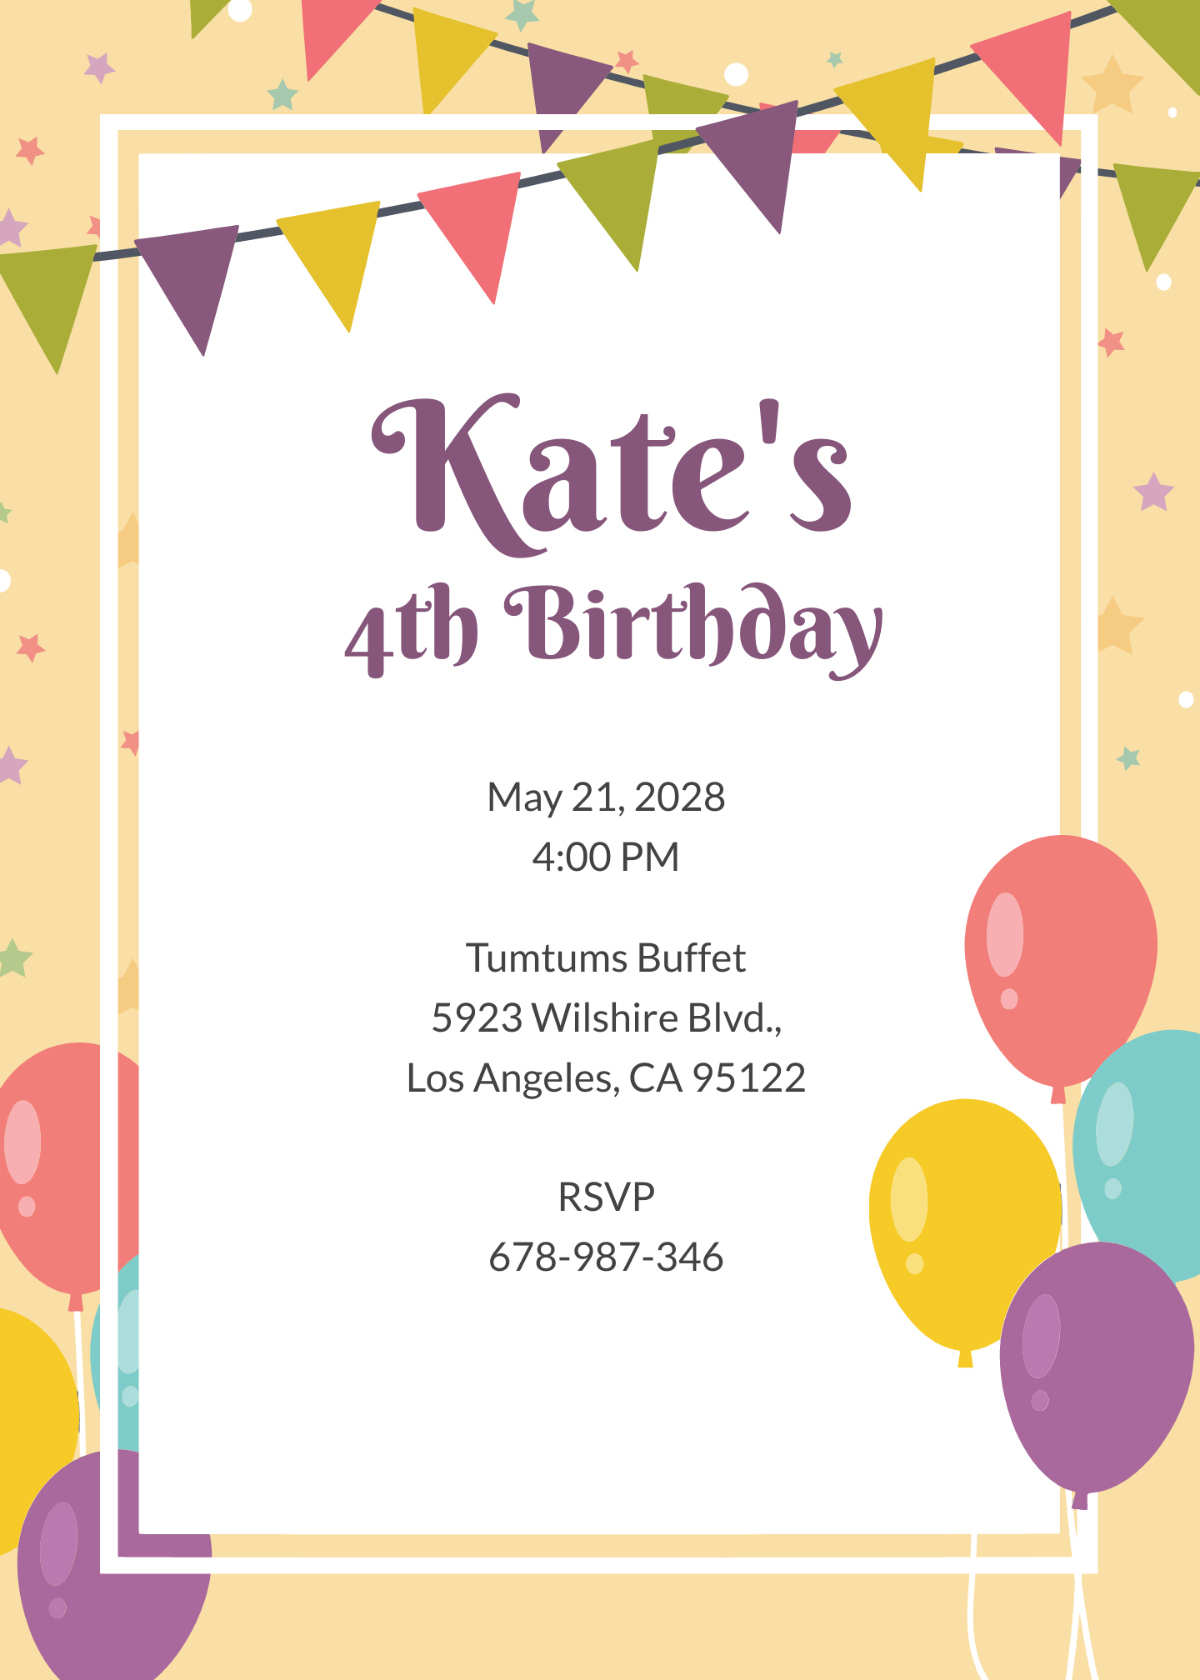 Free Birthday Invitation Templates &amp;amp; Examples - Edit Online &amp;amp; Download throughout Birthday Party Invitations Online Free Printable